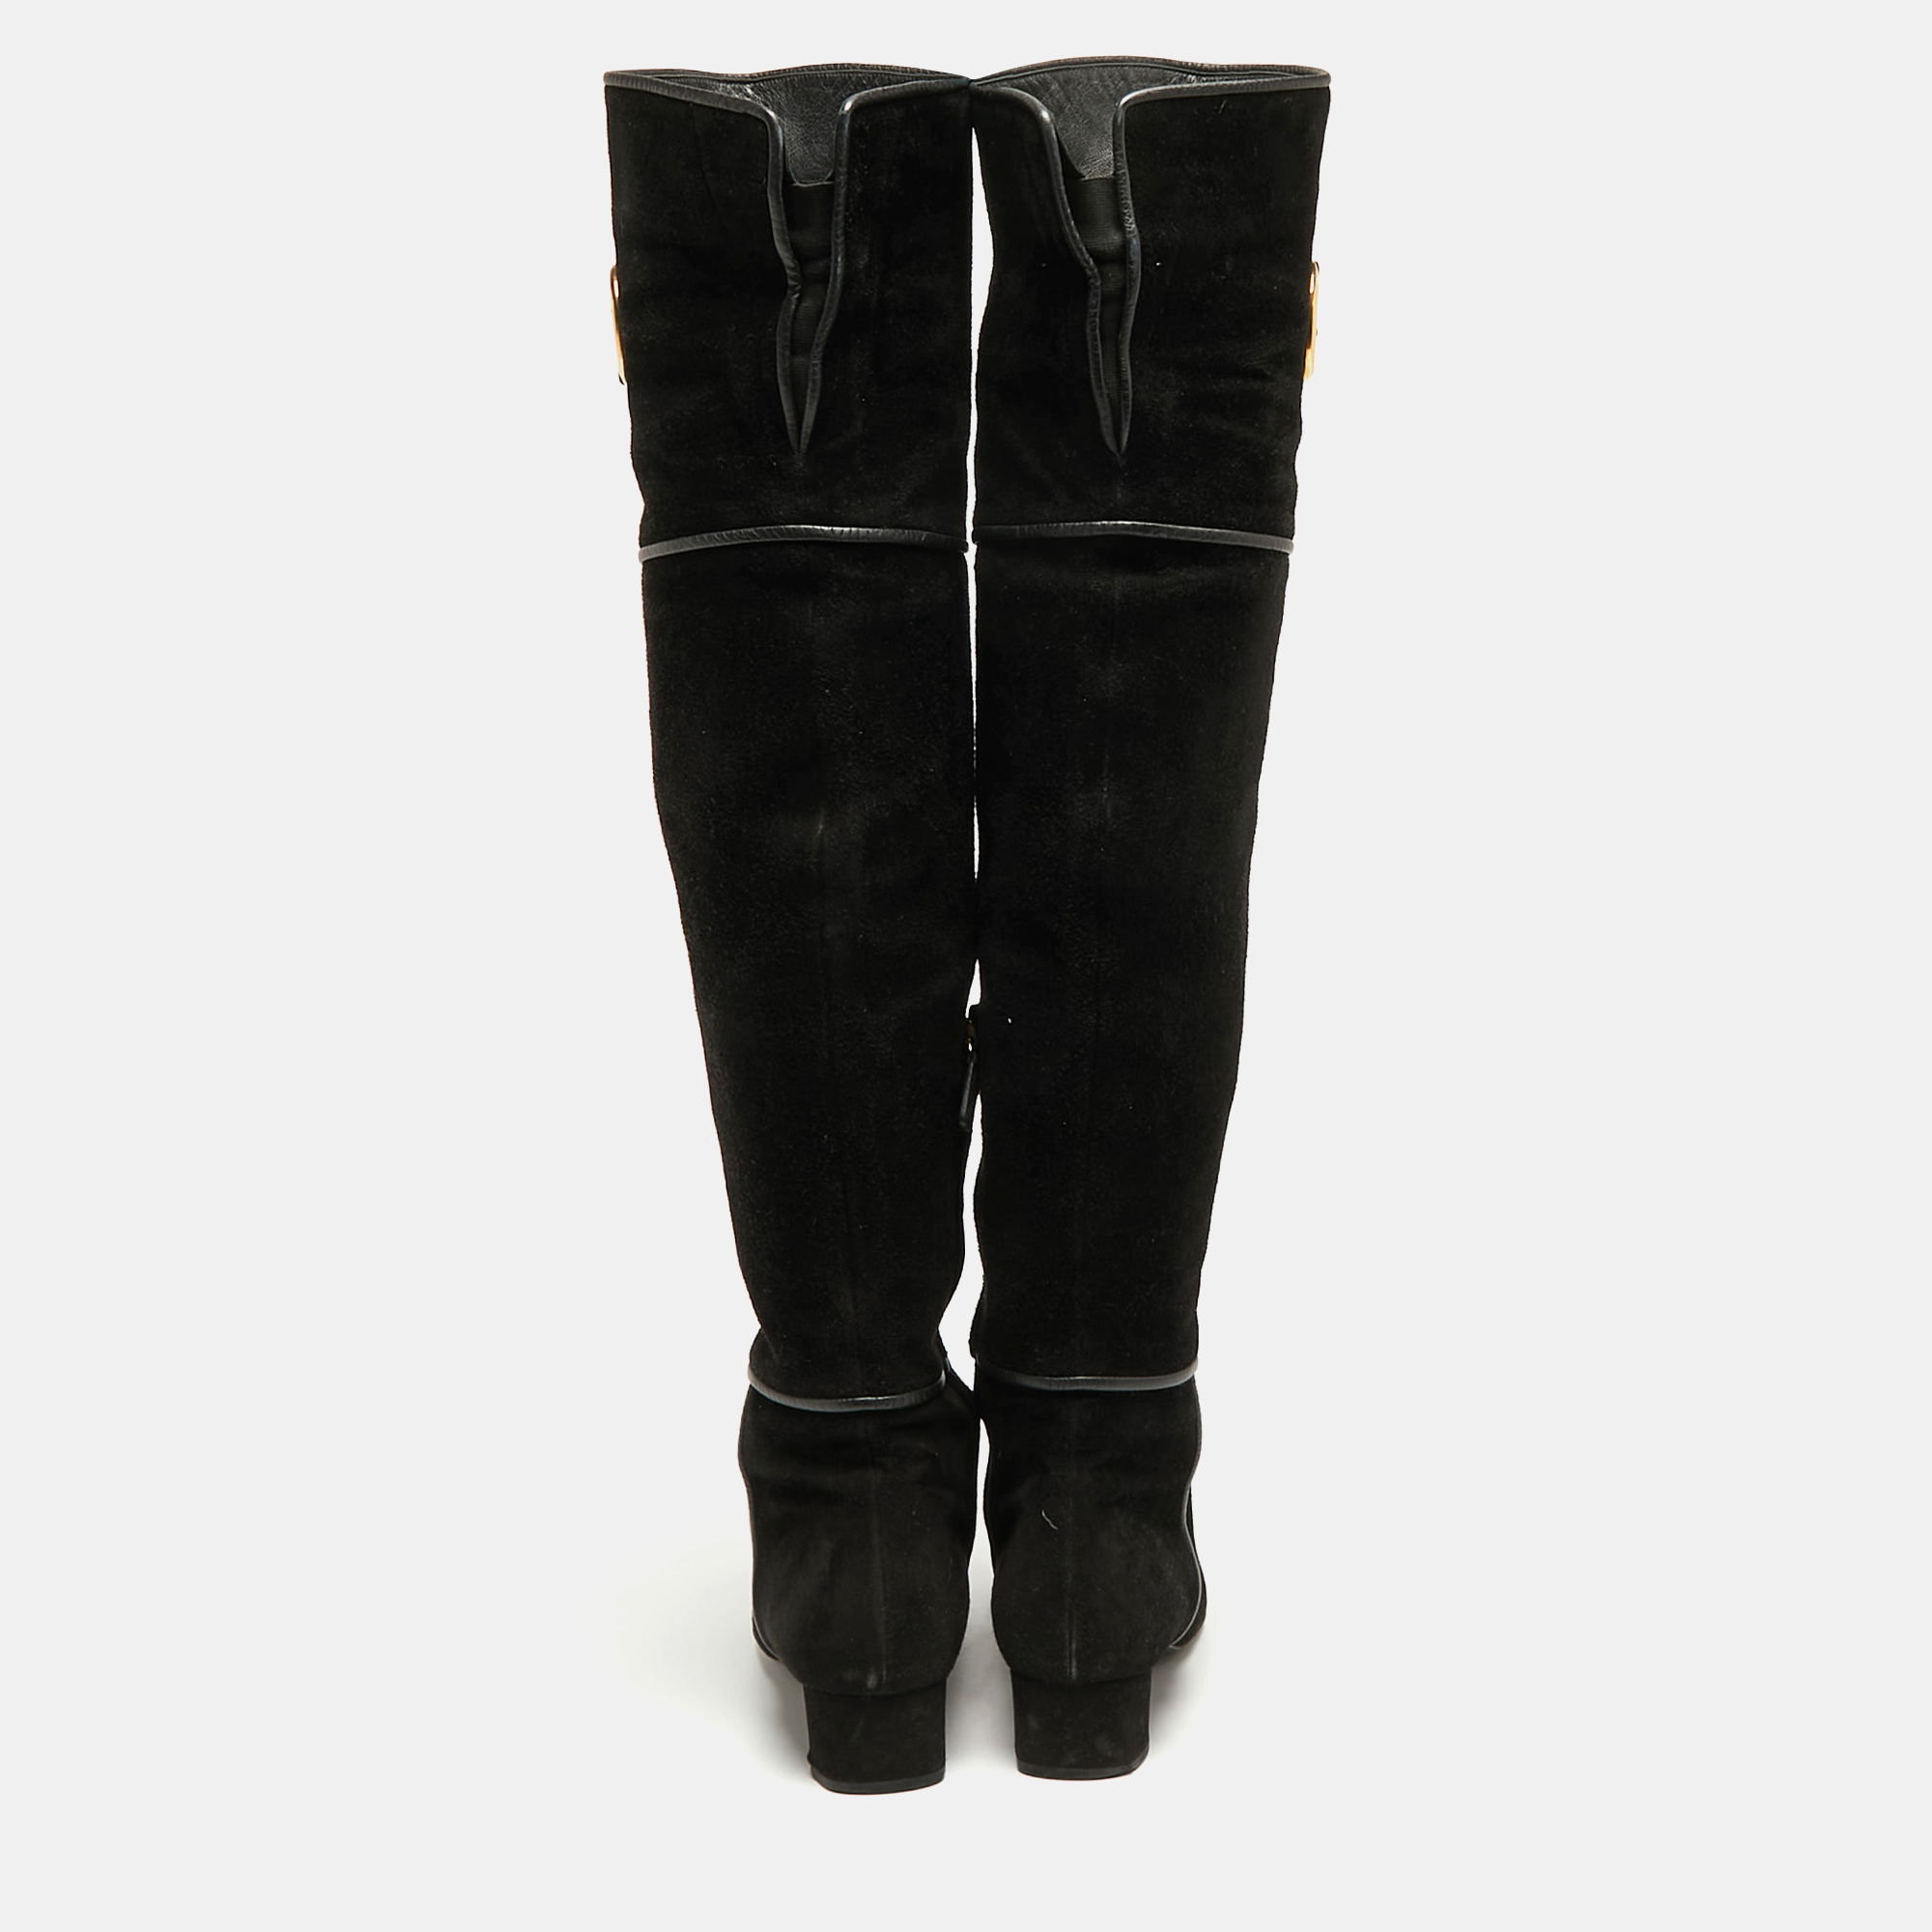 Gucci Black Suede Knee Length Boots Size 38.5